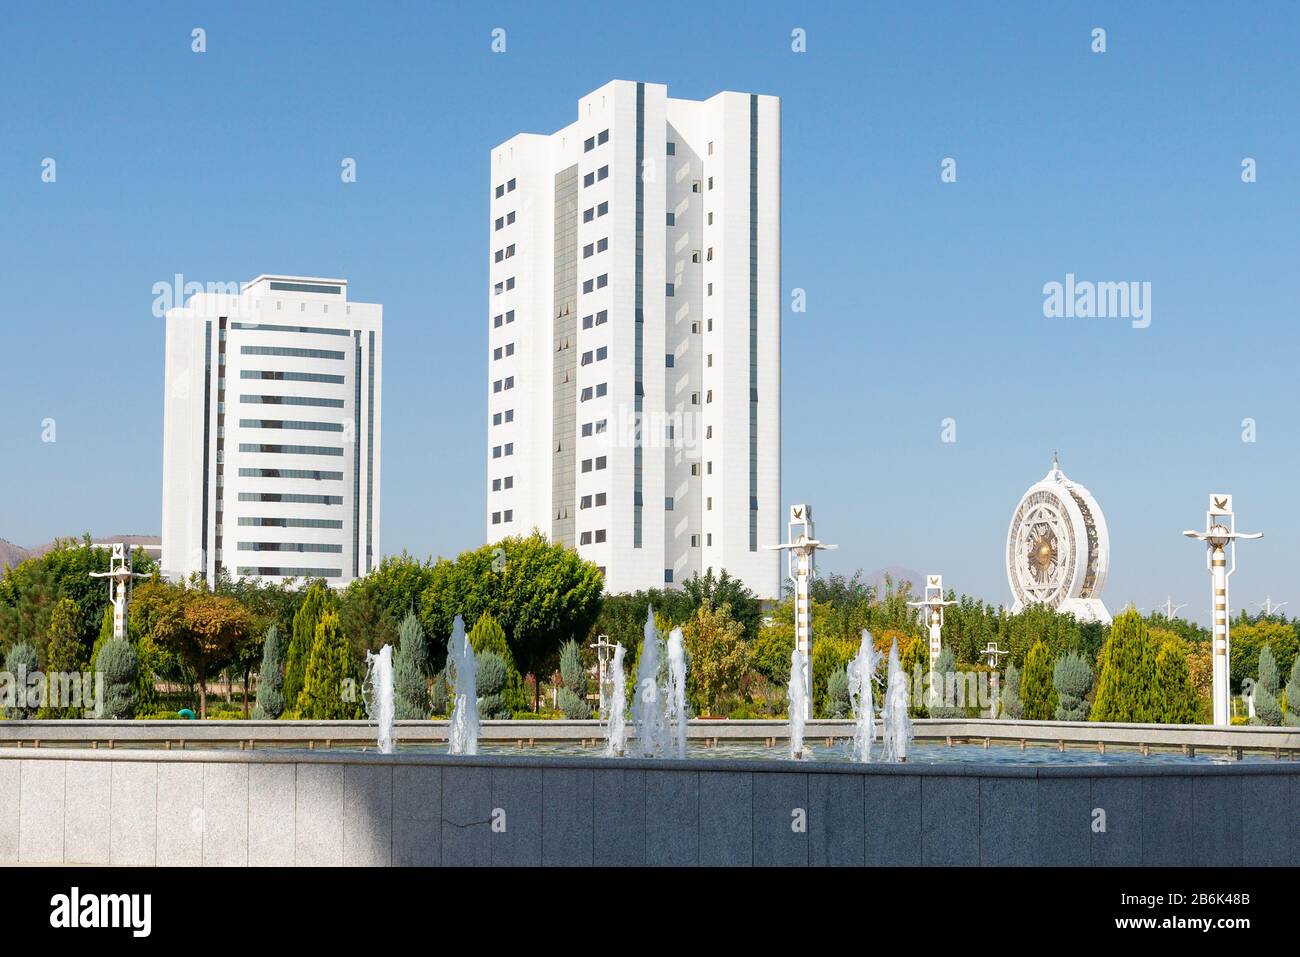 White marble buildings including Alem Cultural and Entertainment Center indoor ferris wheel and two ministries in Ashgabat, Turkmenistan. Stock Photo